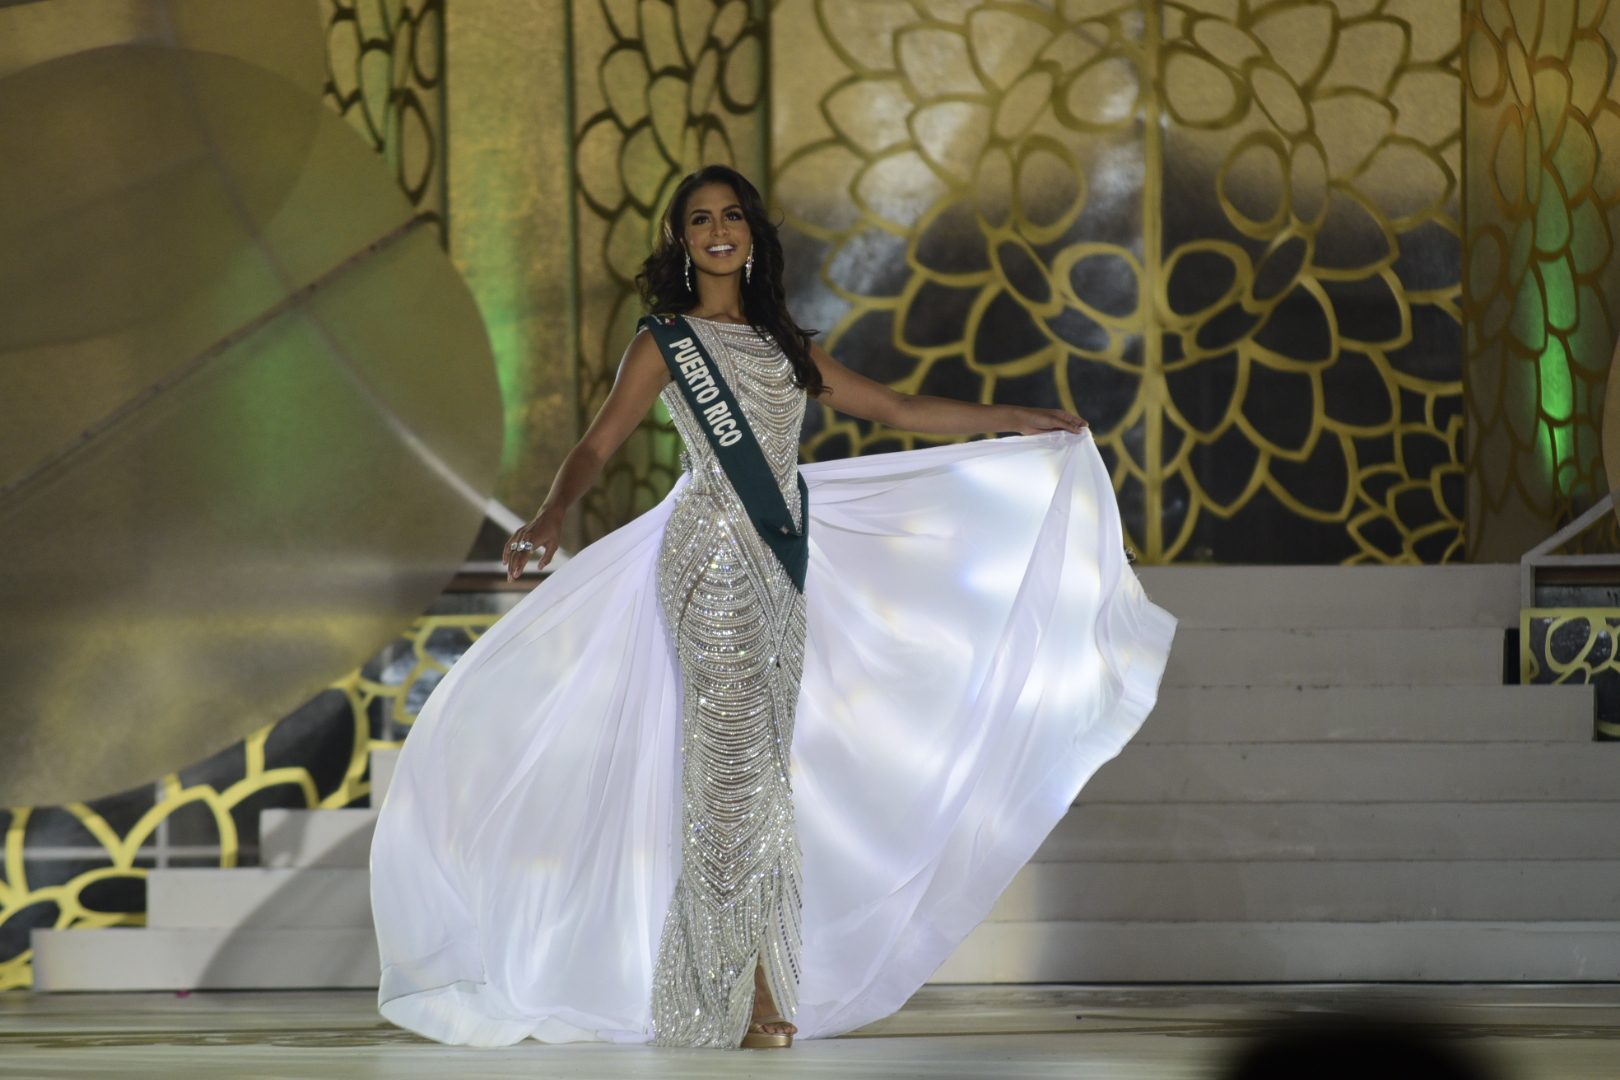 Puerto Rico’s Nellys Pimentel is Miss Earth 2019